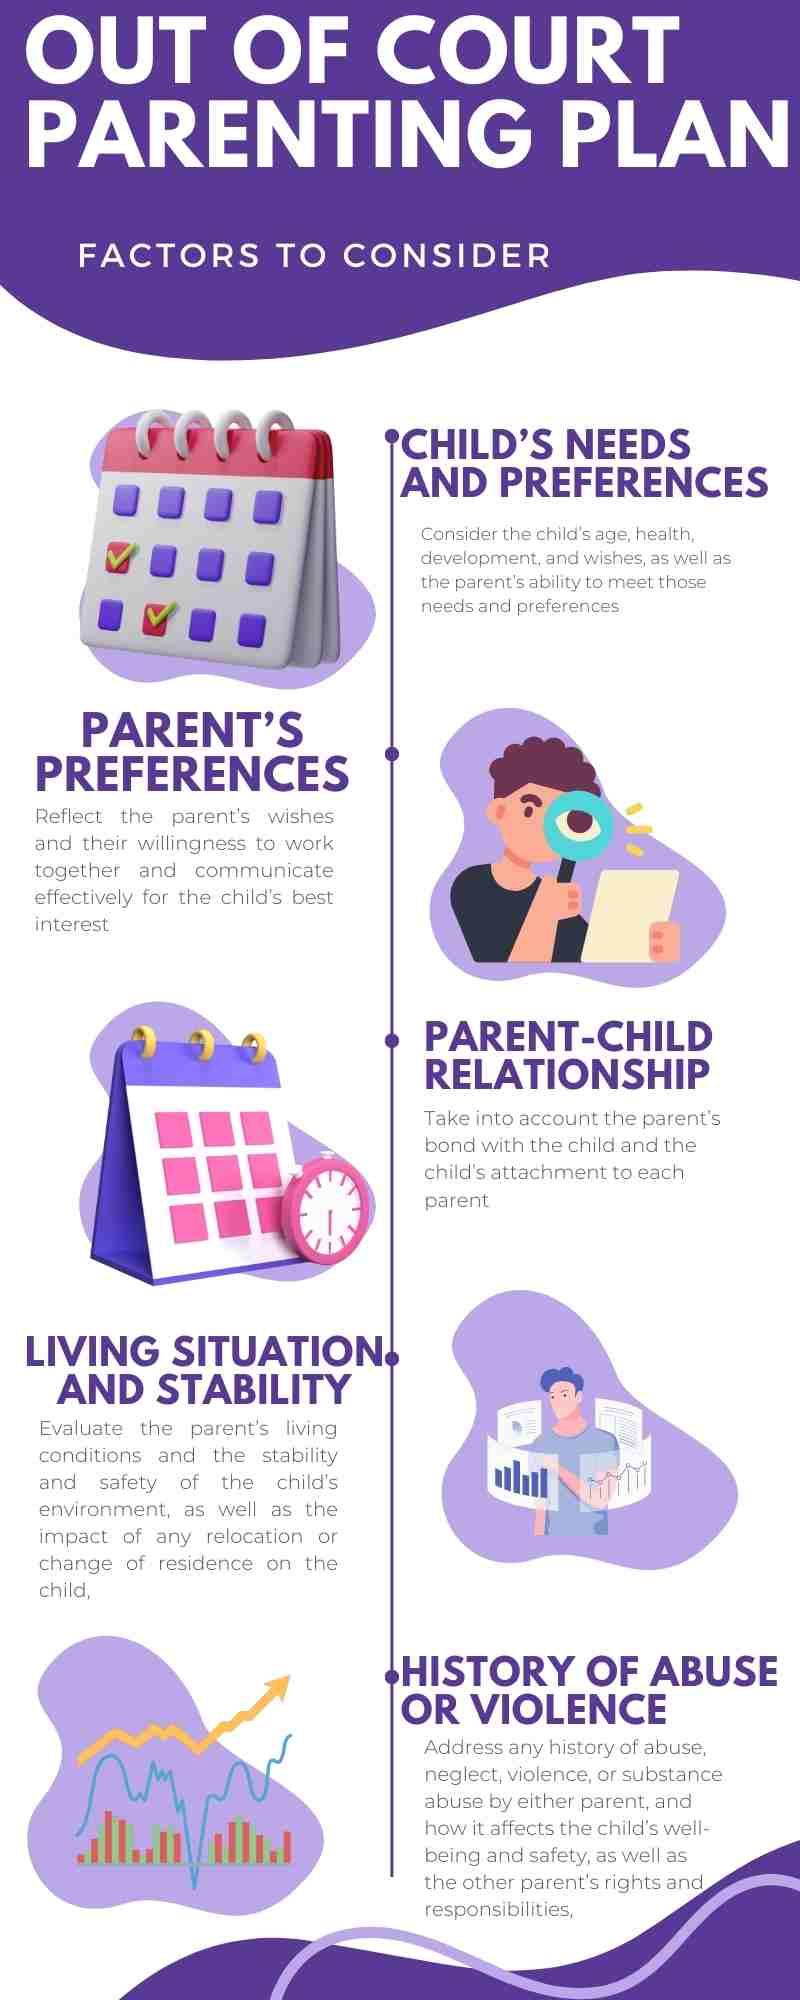 An infographic detailing various factors to consider in a joint custody parenting plan in Texas, including the child's needs, parent preferences, living situations, and history of violence or substance abuse.